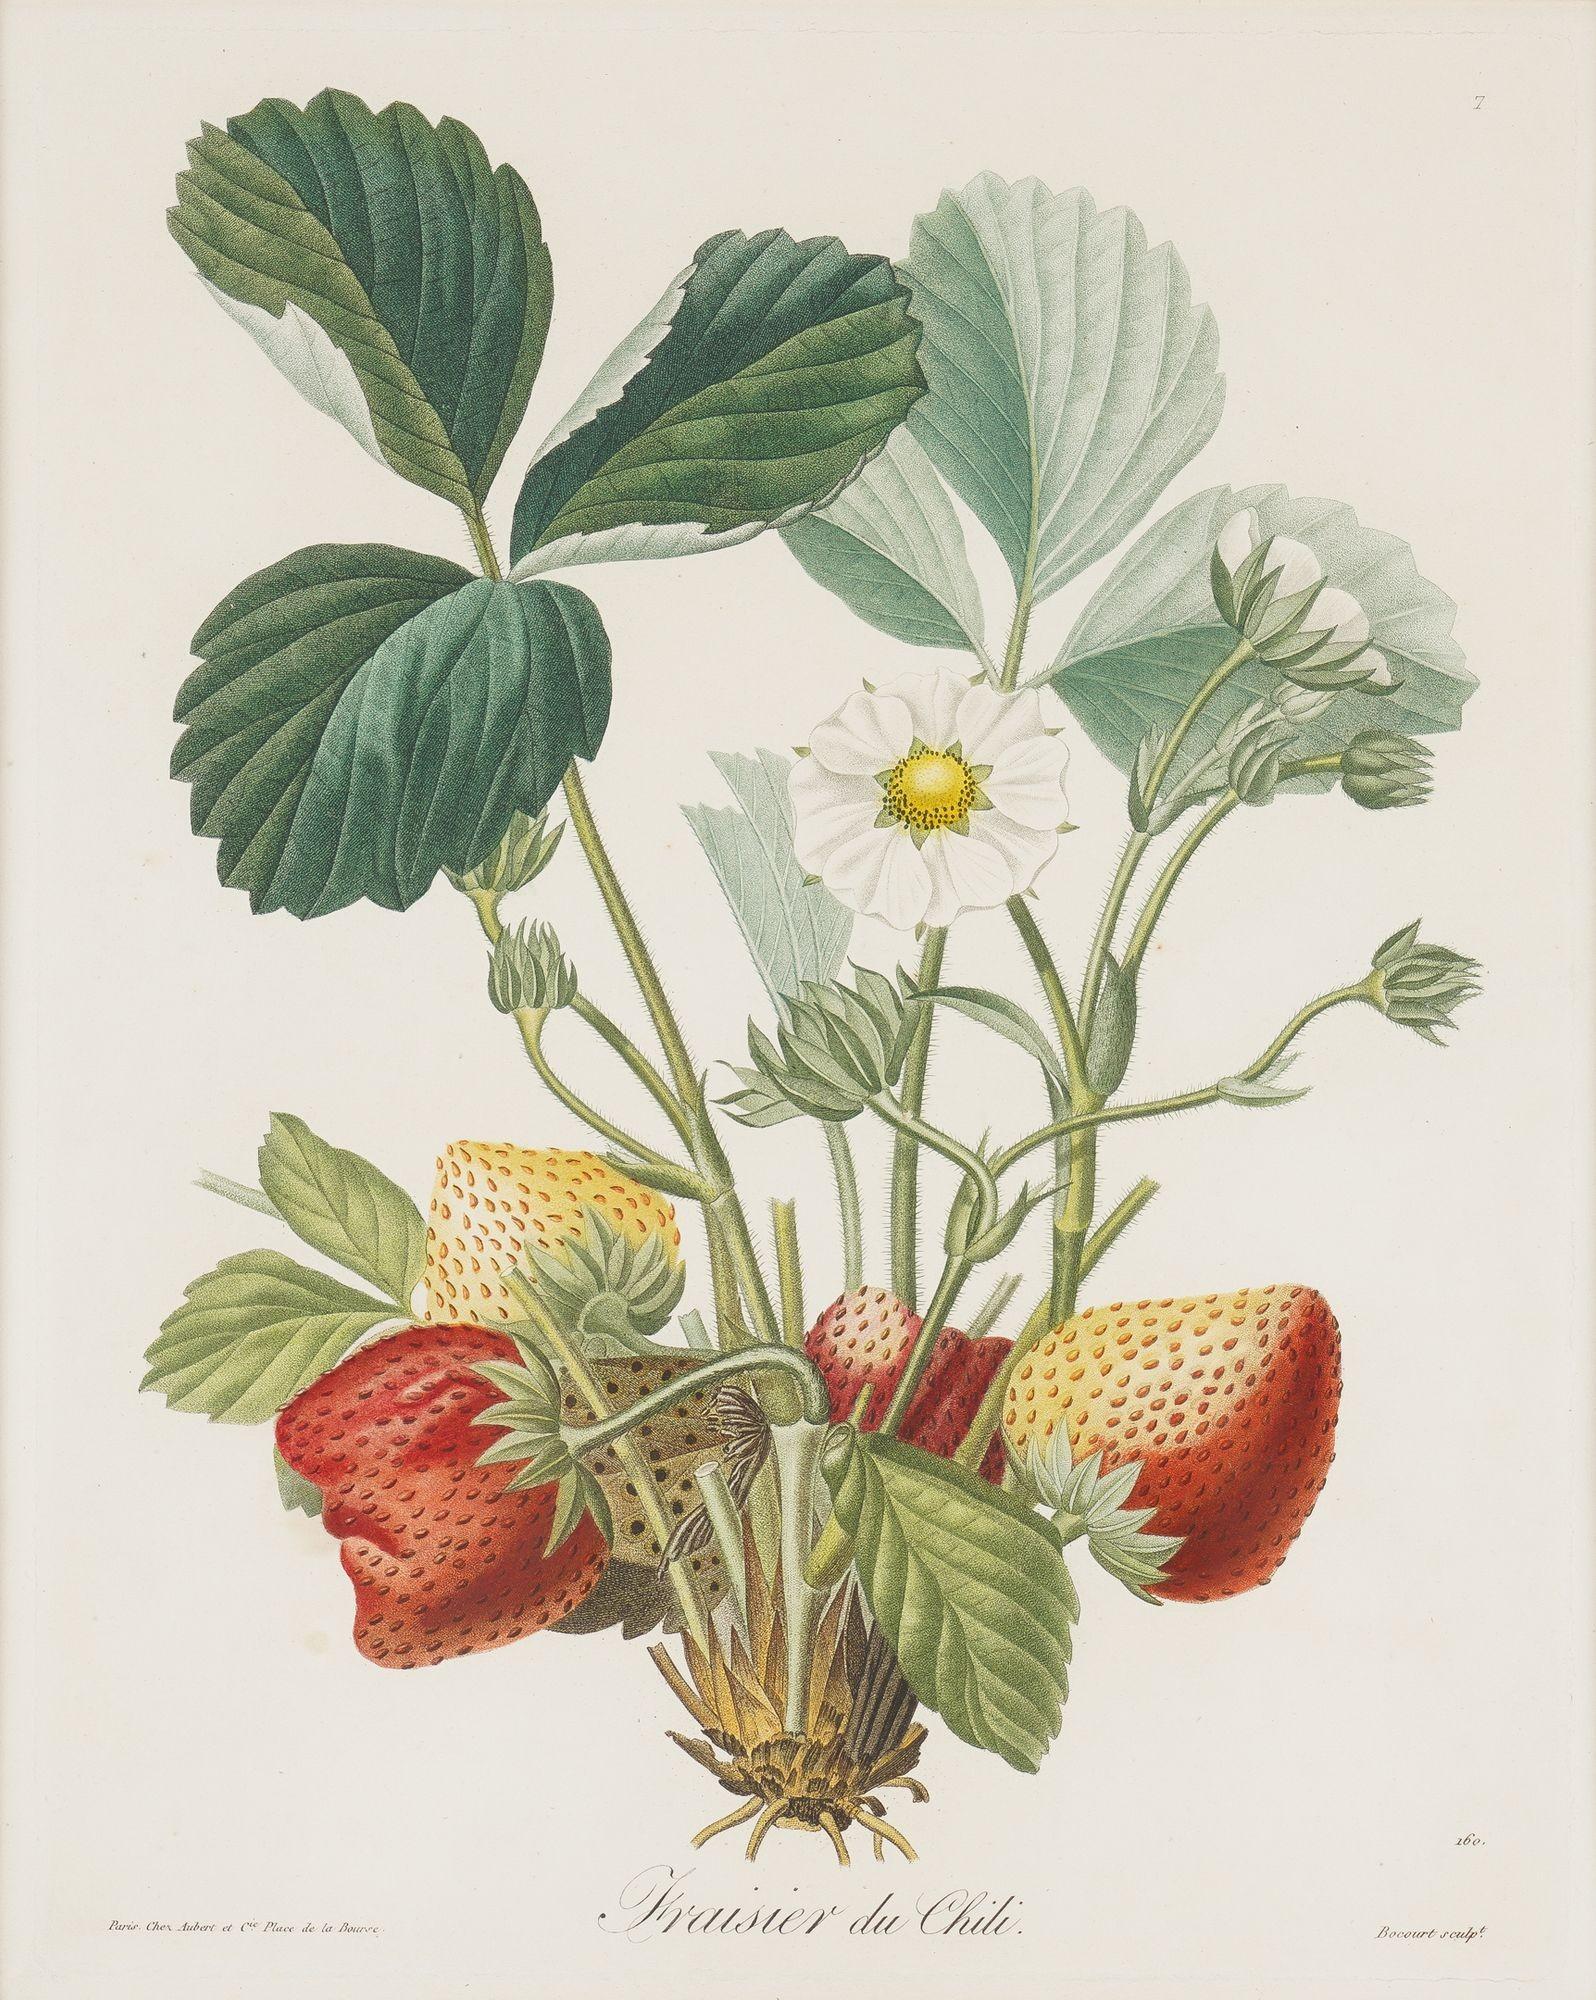 Stippled engraving of a botanical specimen strawberry plant by Pierre-Joseph Redouté (1759-1840), titled 